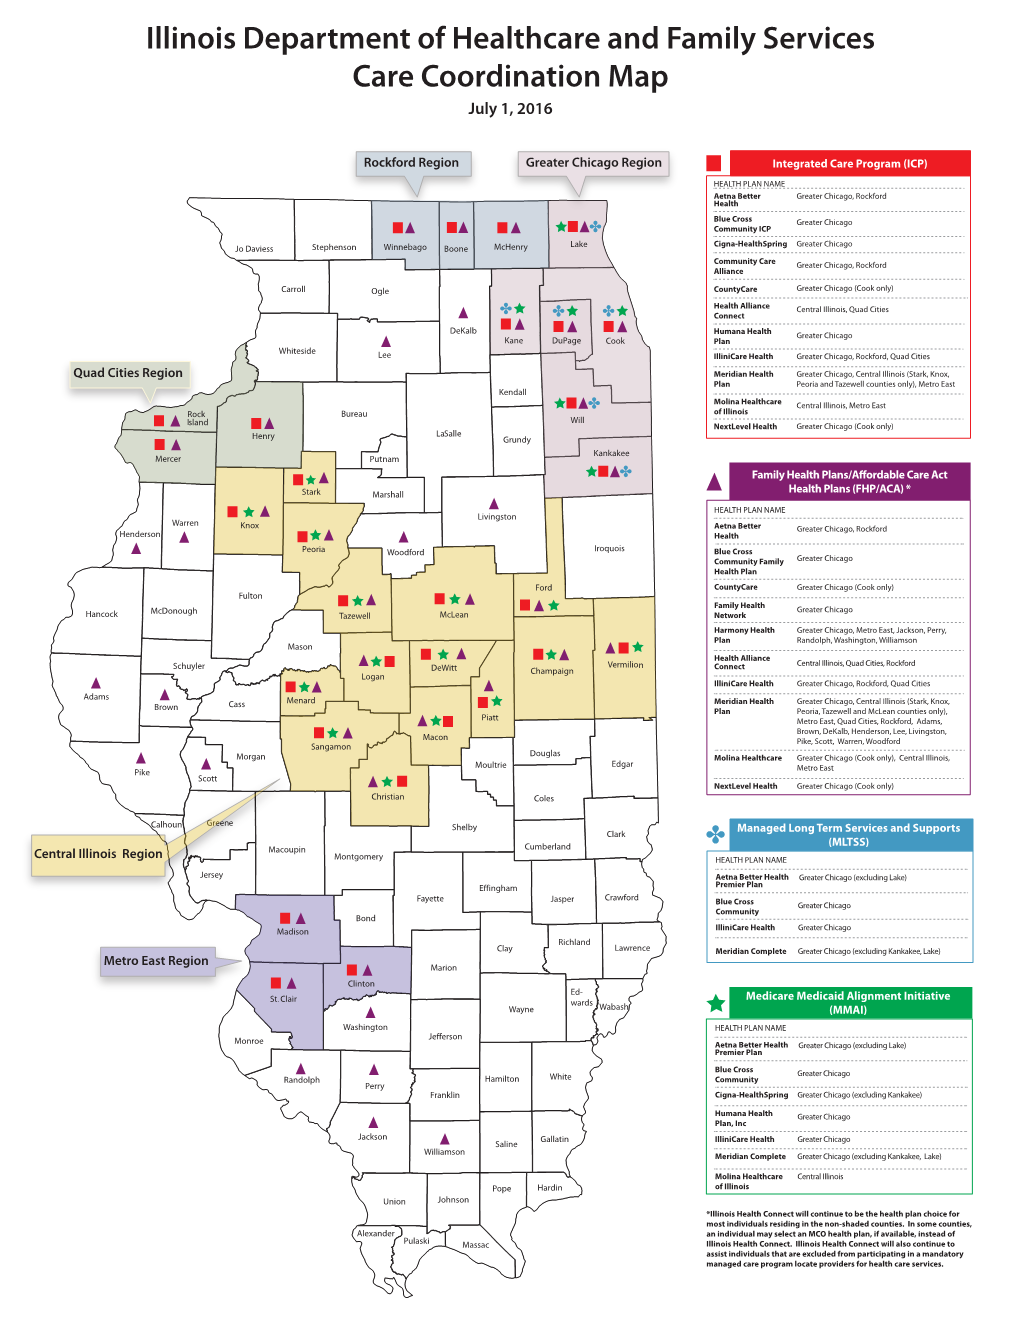 Care Coordination Map July 1, 2016